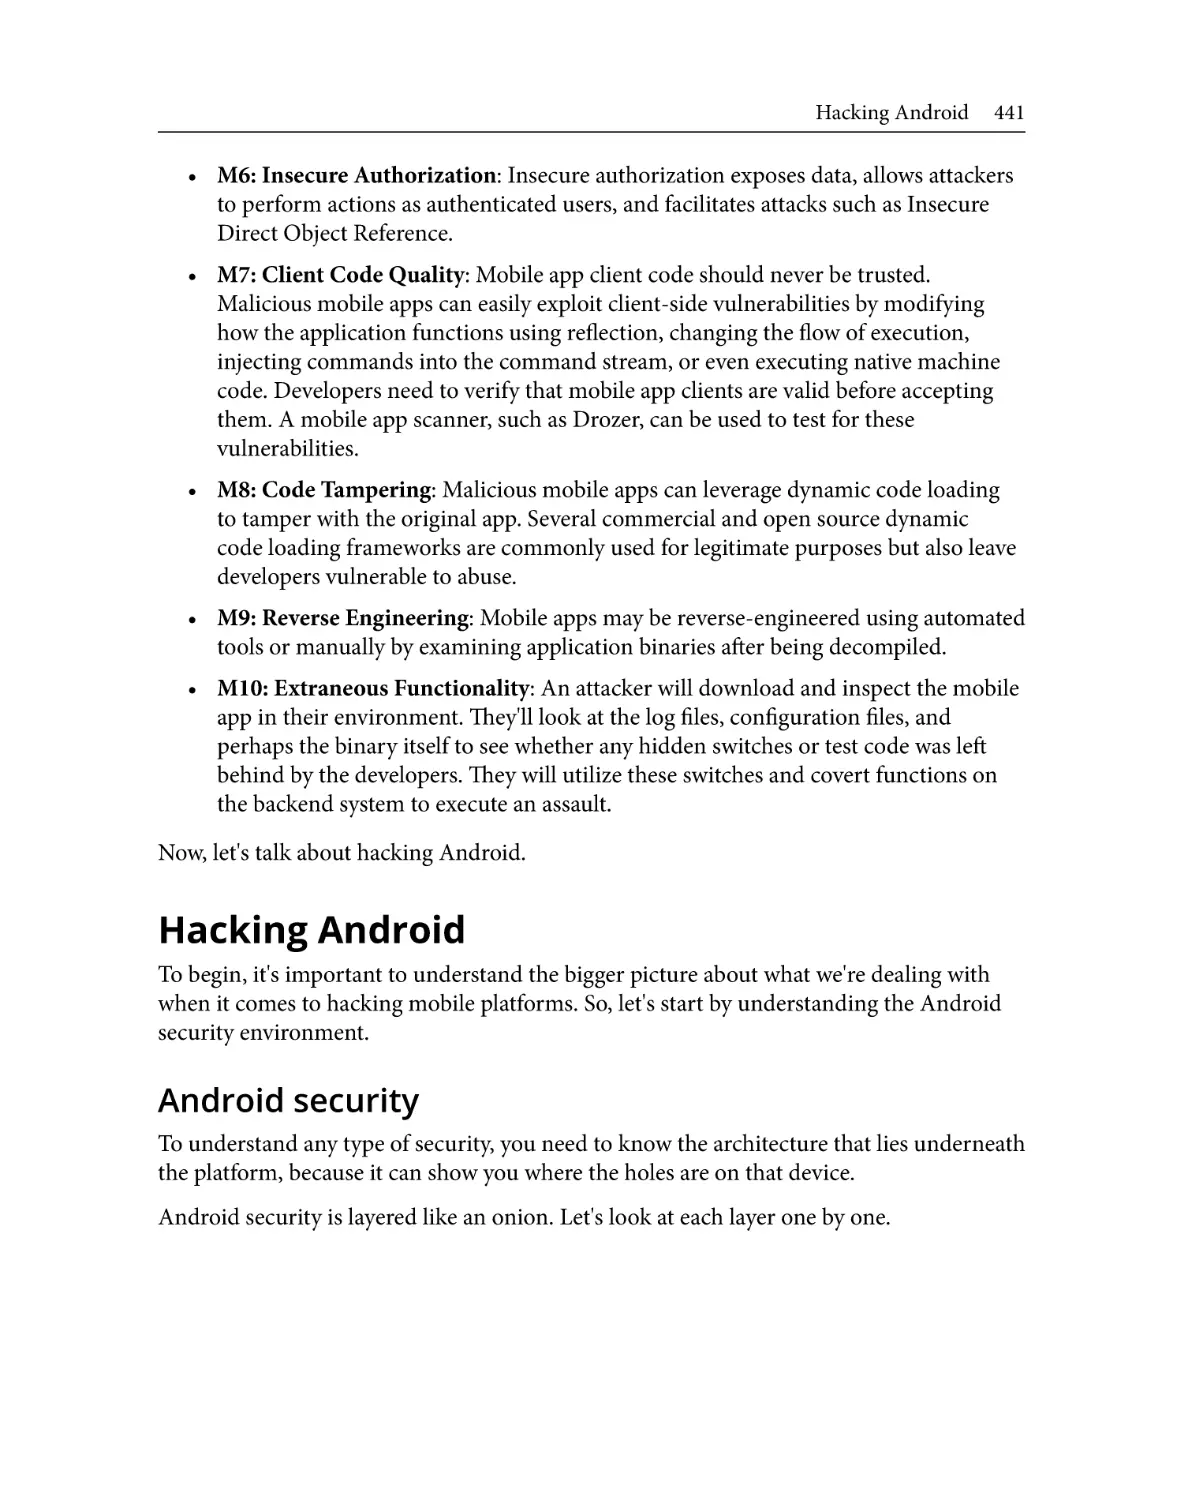 Hacking Android
Android security